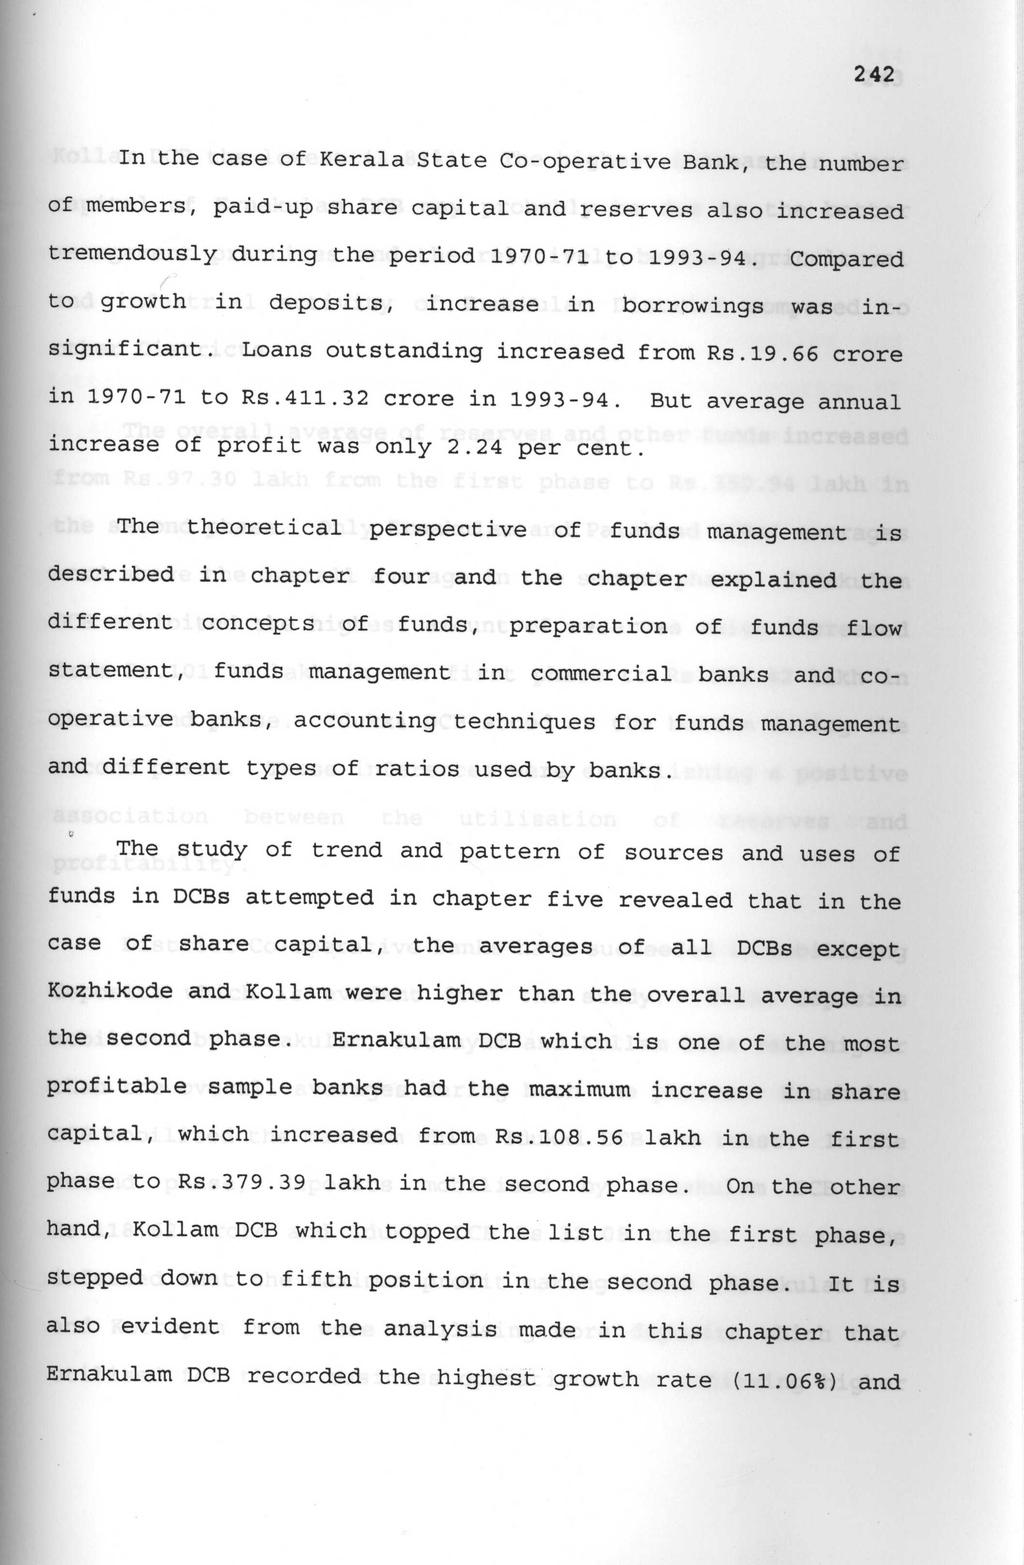 2 42 In the case of Kerala State Co-operative Bank, the number of members, paid-up share capital and reserves also increased tremendously during the period 1970-71 to 1993-94.